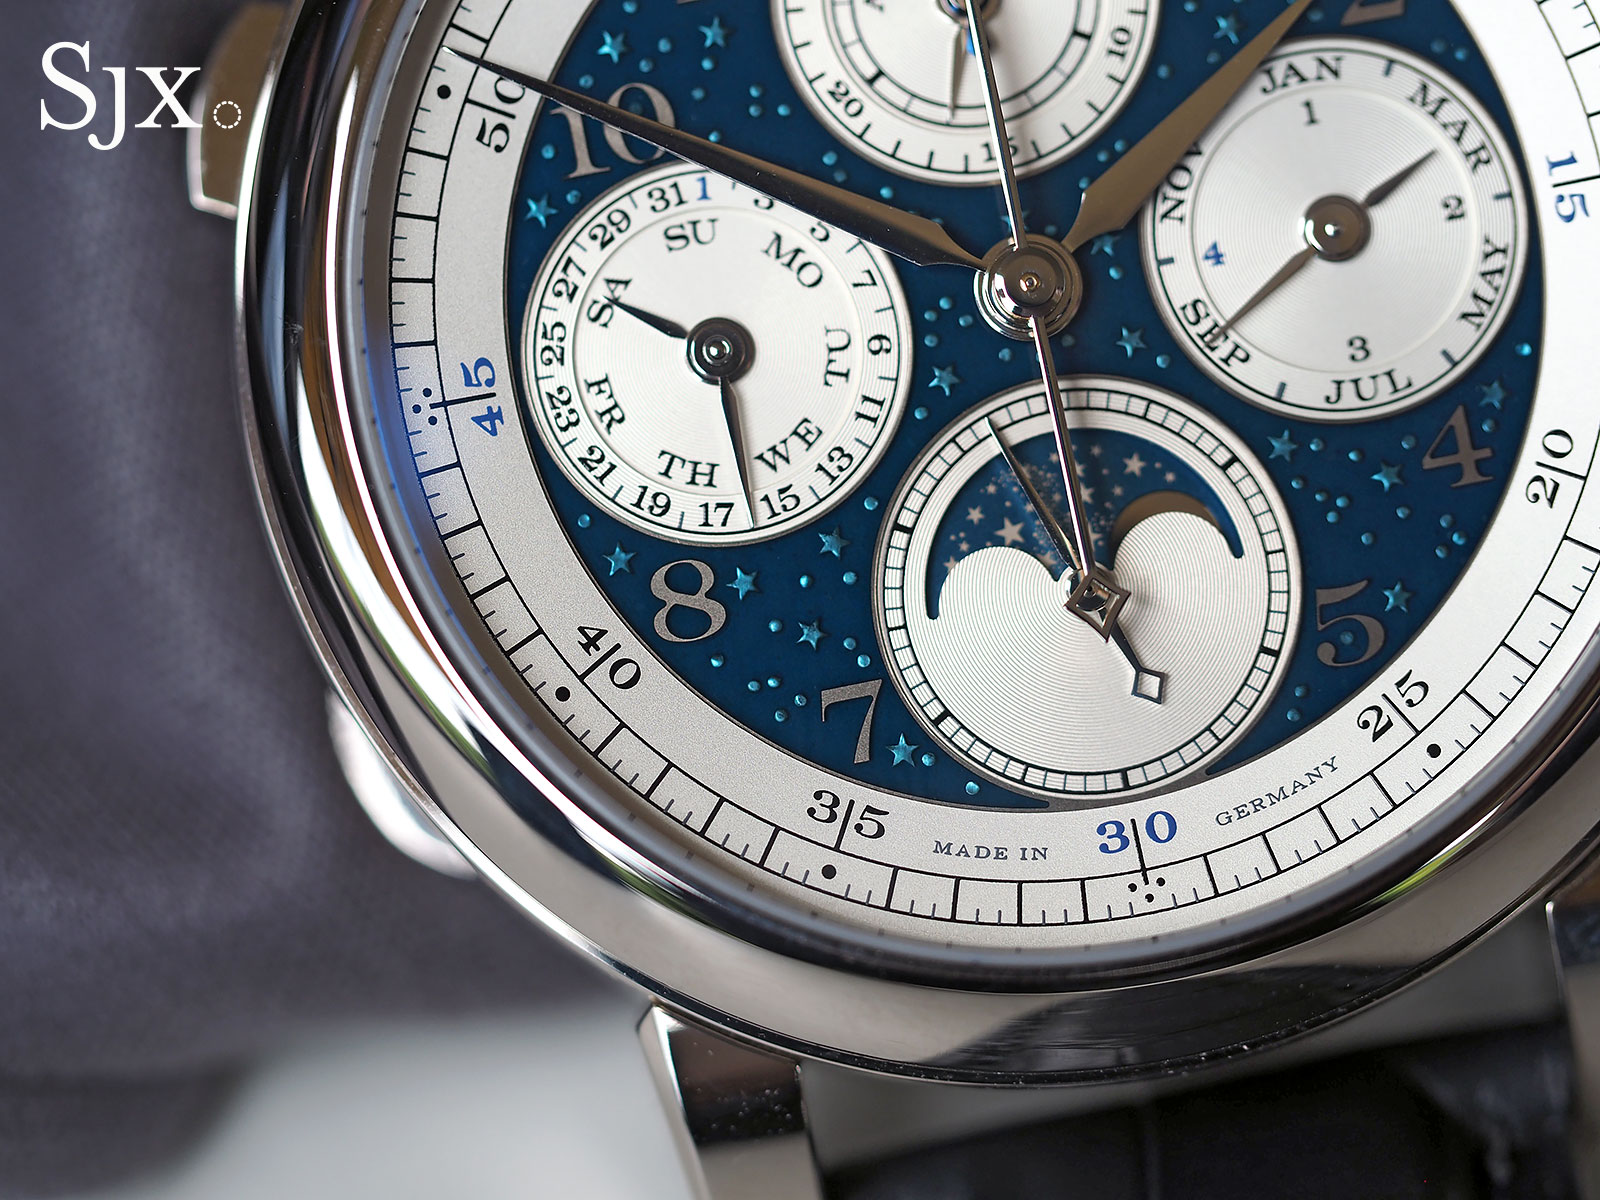 Introducing the A. Lange & Söhne 1815 Rattrapante Perpetual Calendar ...